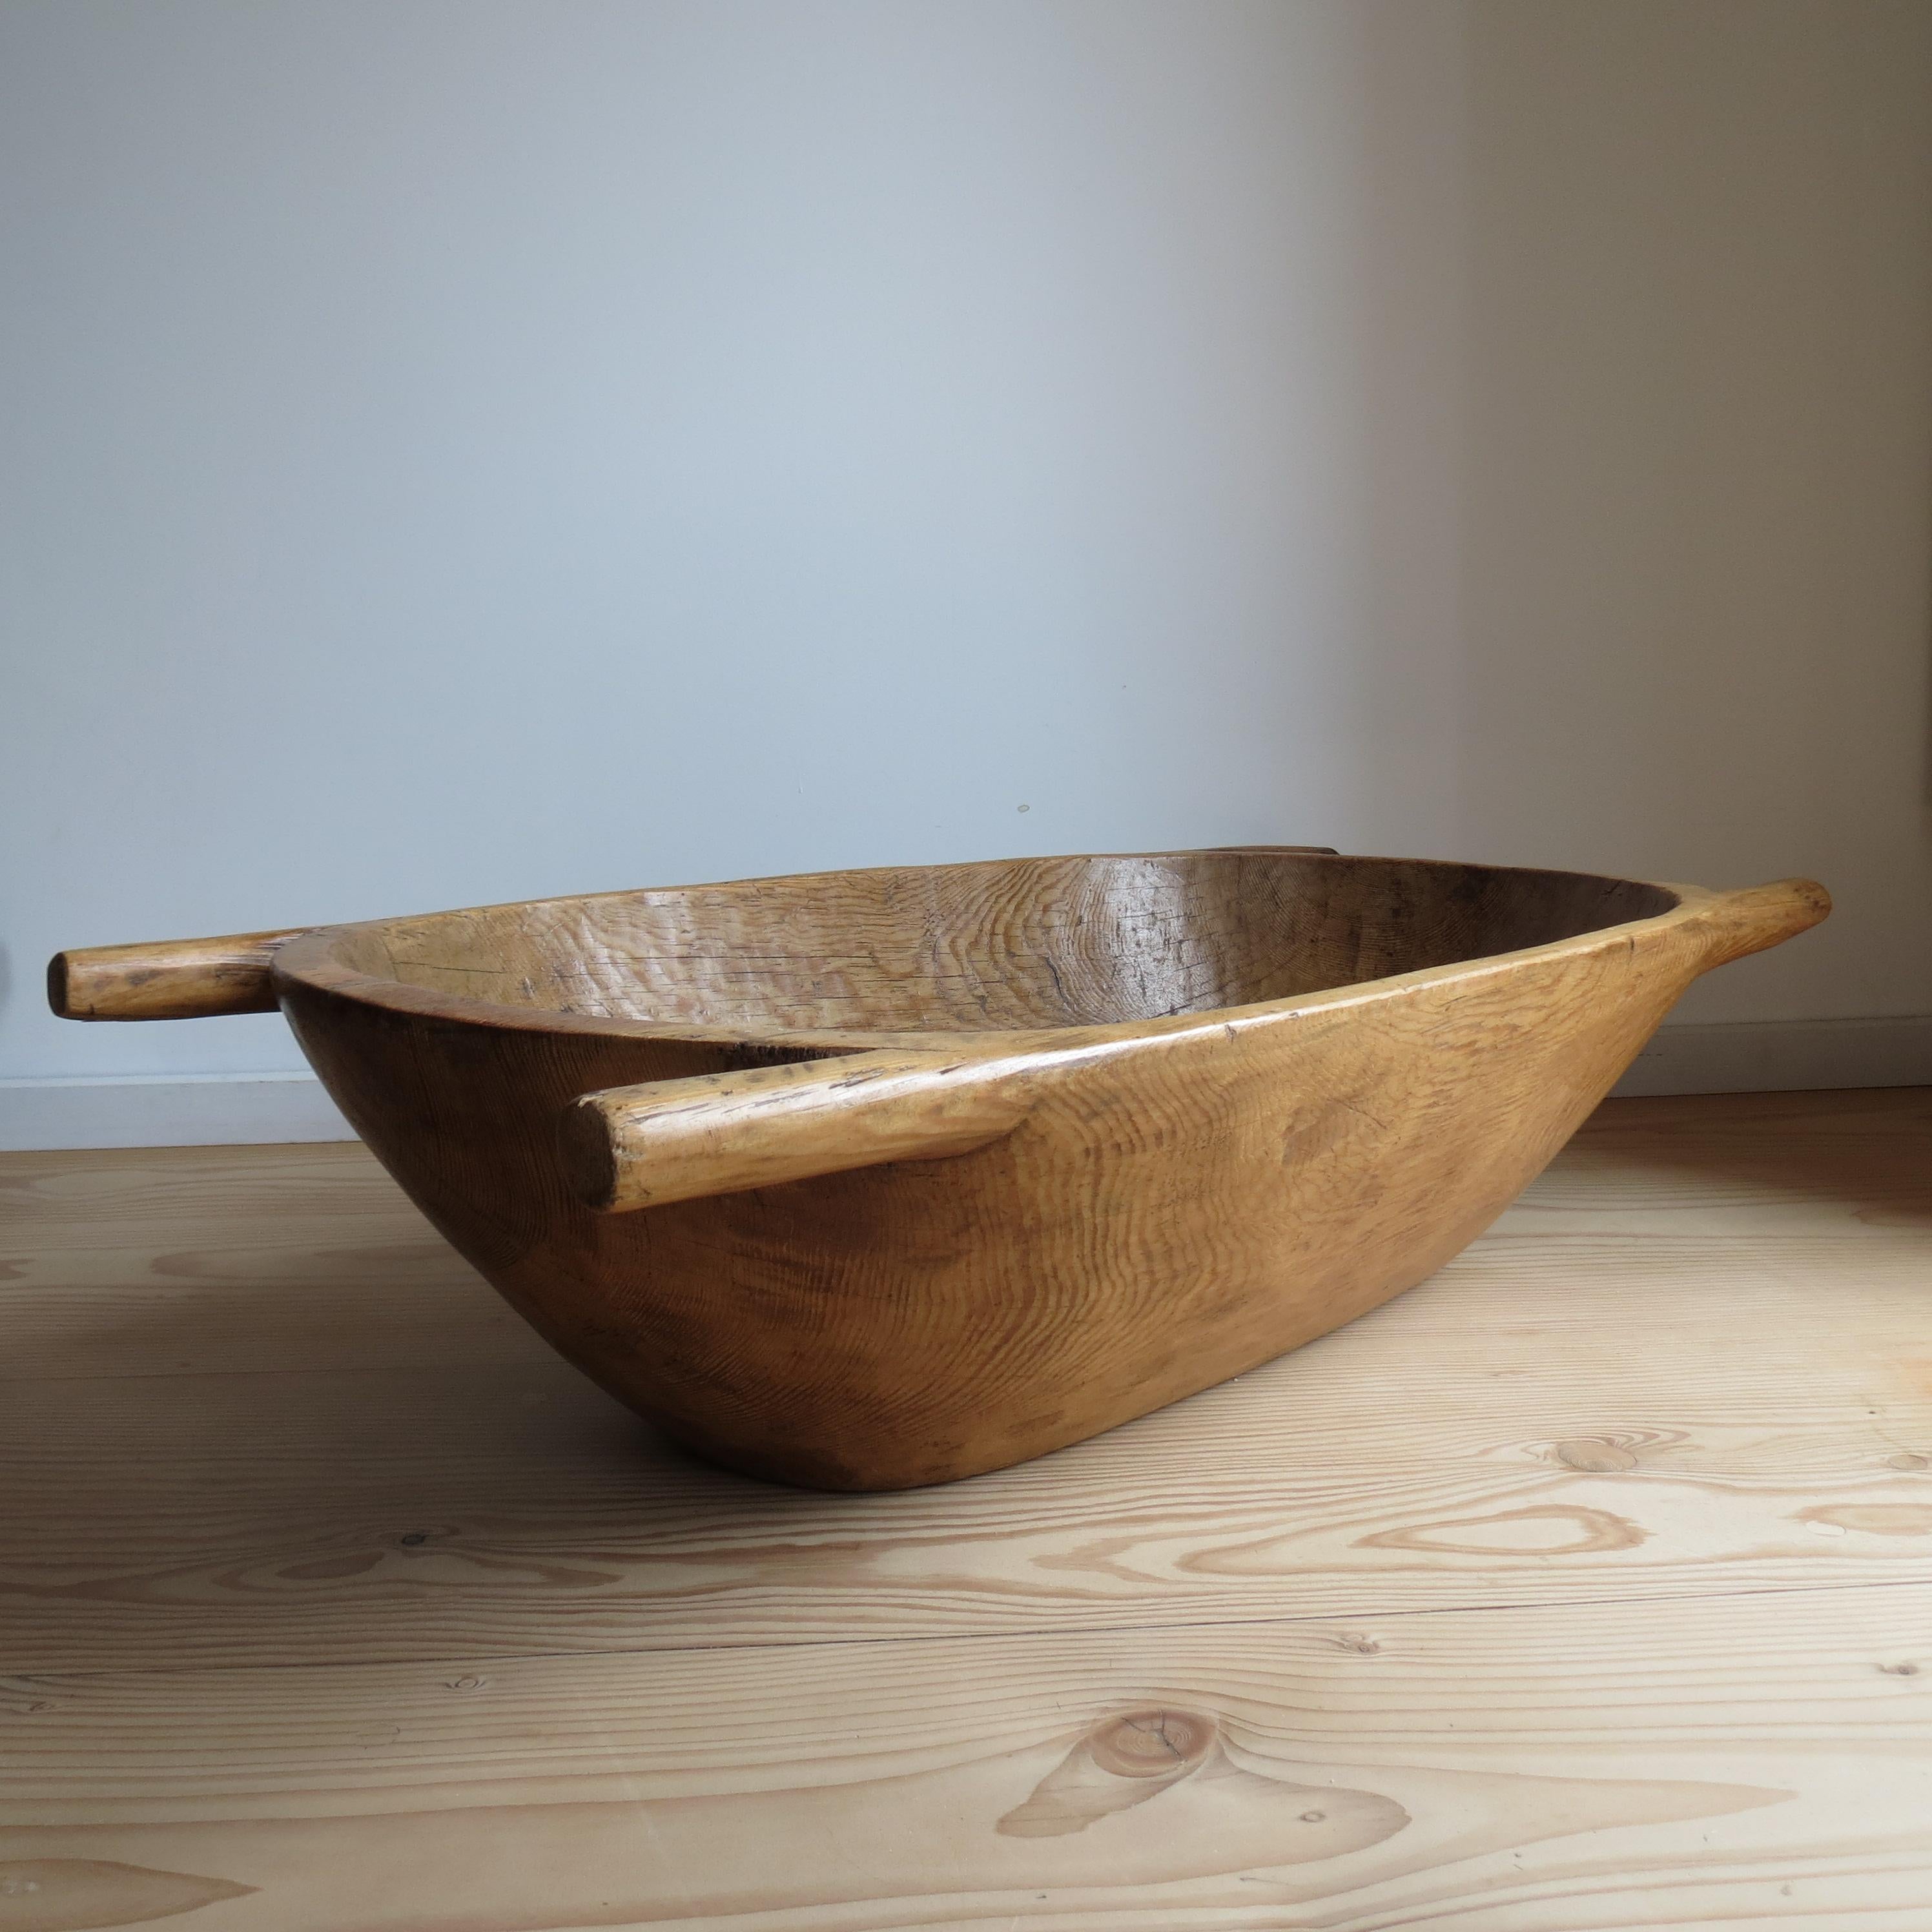 A very good heavy European trug with carrying handles from the first half of the 20th Century

Hand shaped from a single piece of wood, Douglas Fir Pine 

Very good colour and nicely patinated with tooling marks all over

Delivery can be arranged